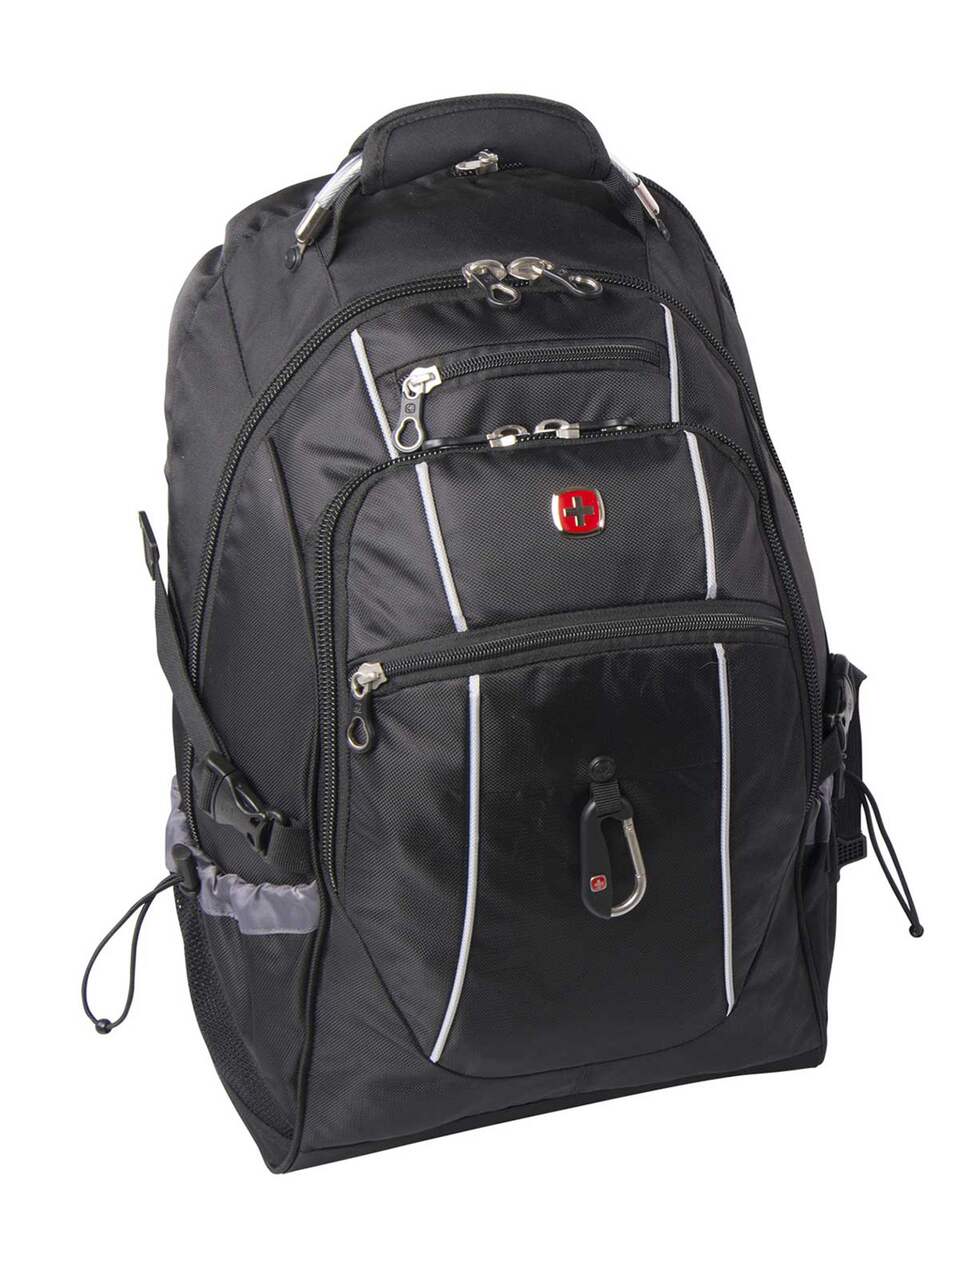 Swiss Gear Executive Laptop Backpack w/ RFID Blocking Pocket For